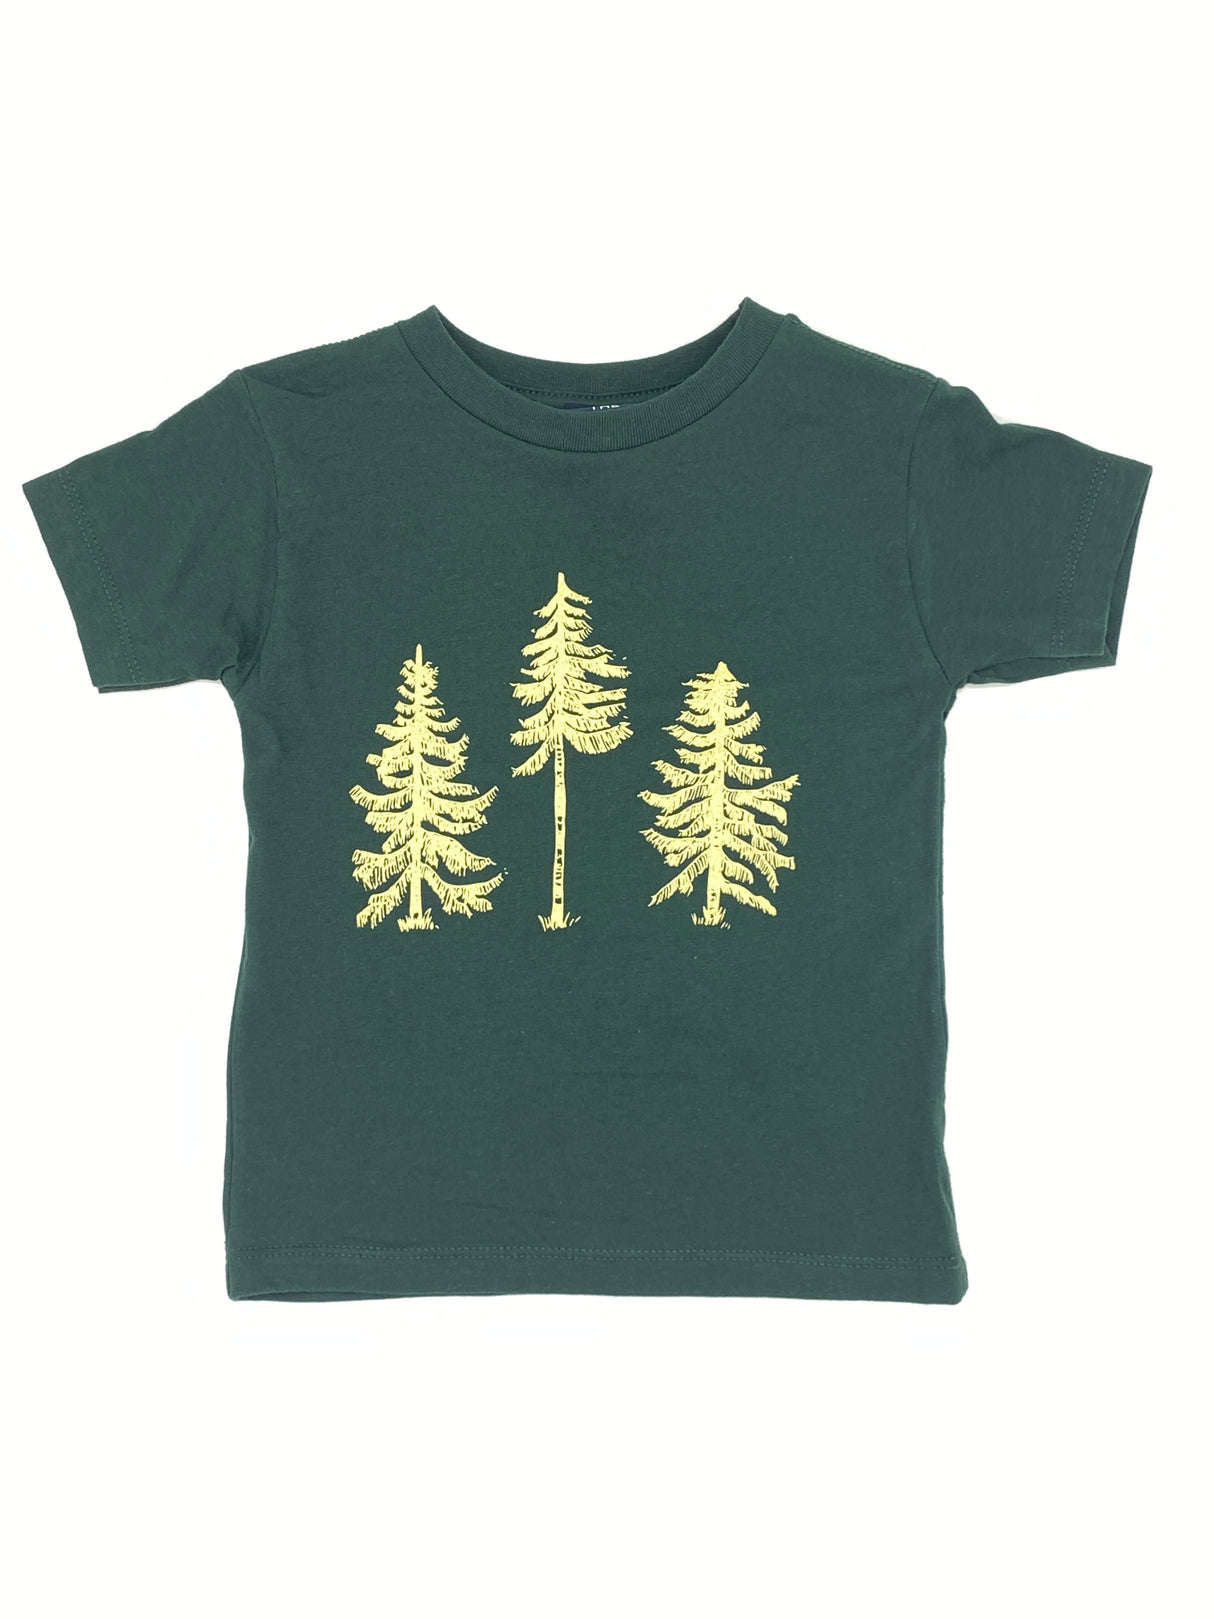 The Loon: Three Pines® Toddler Short Sleeve